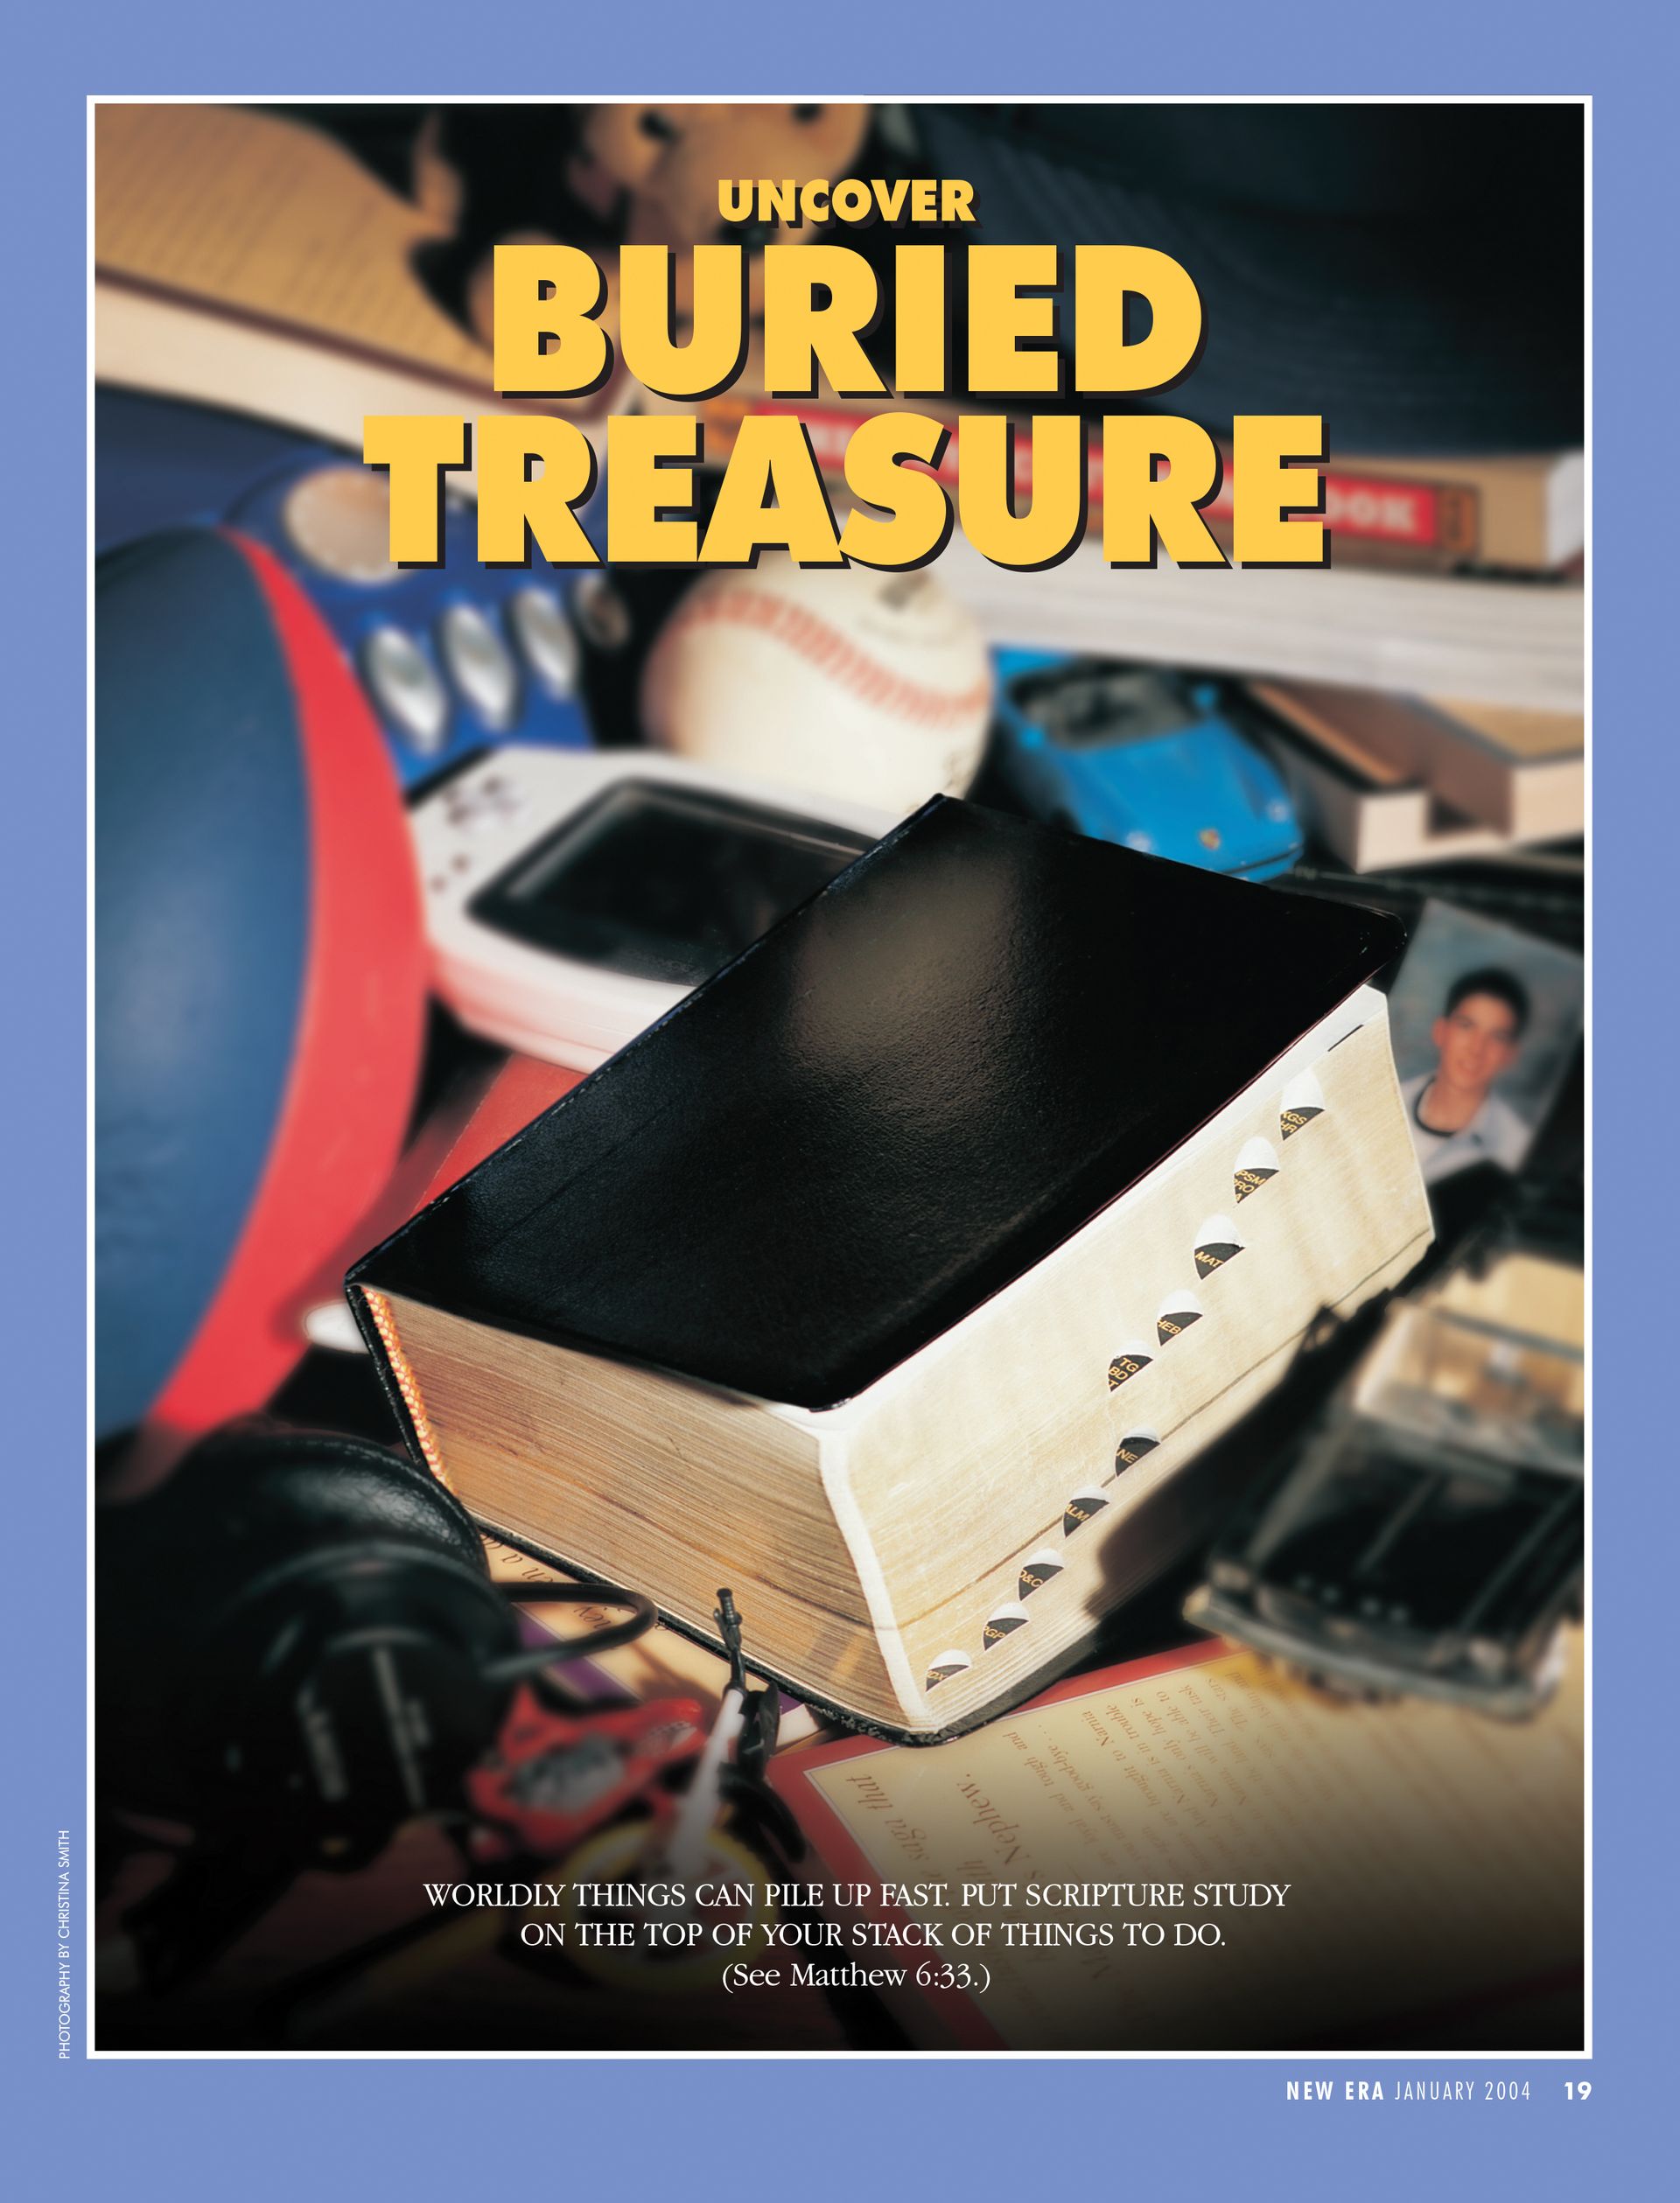 Uncover Buried Treasure. Worldly things can pile up fast. Put scripture study on the top of your stack of things to do. (See Matthew 6:33.) Jan. 2004 © undefined ipCode 1.